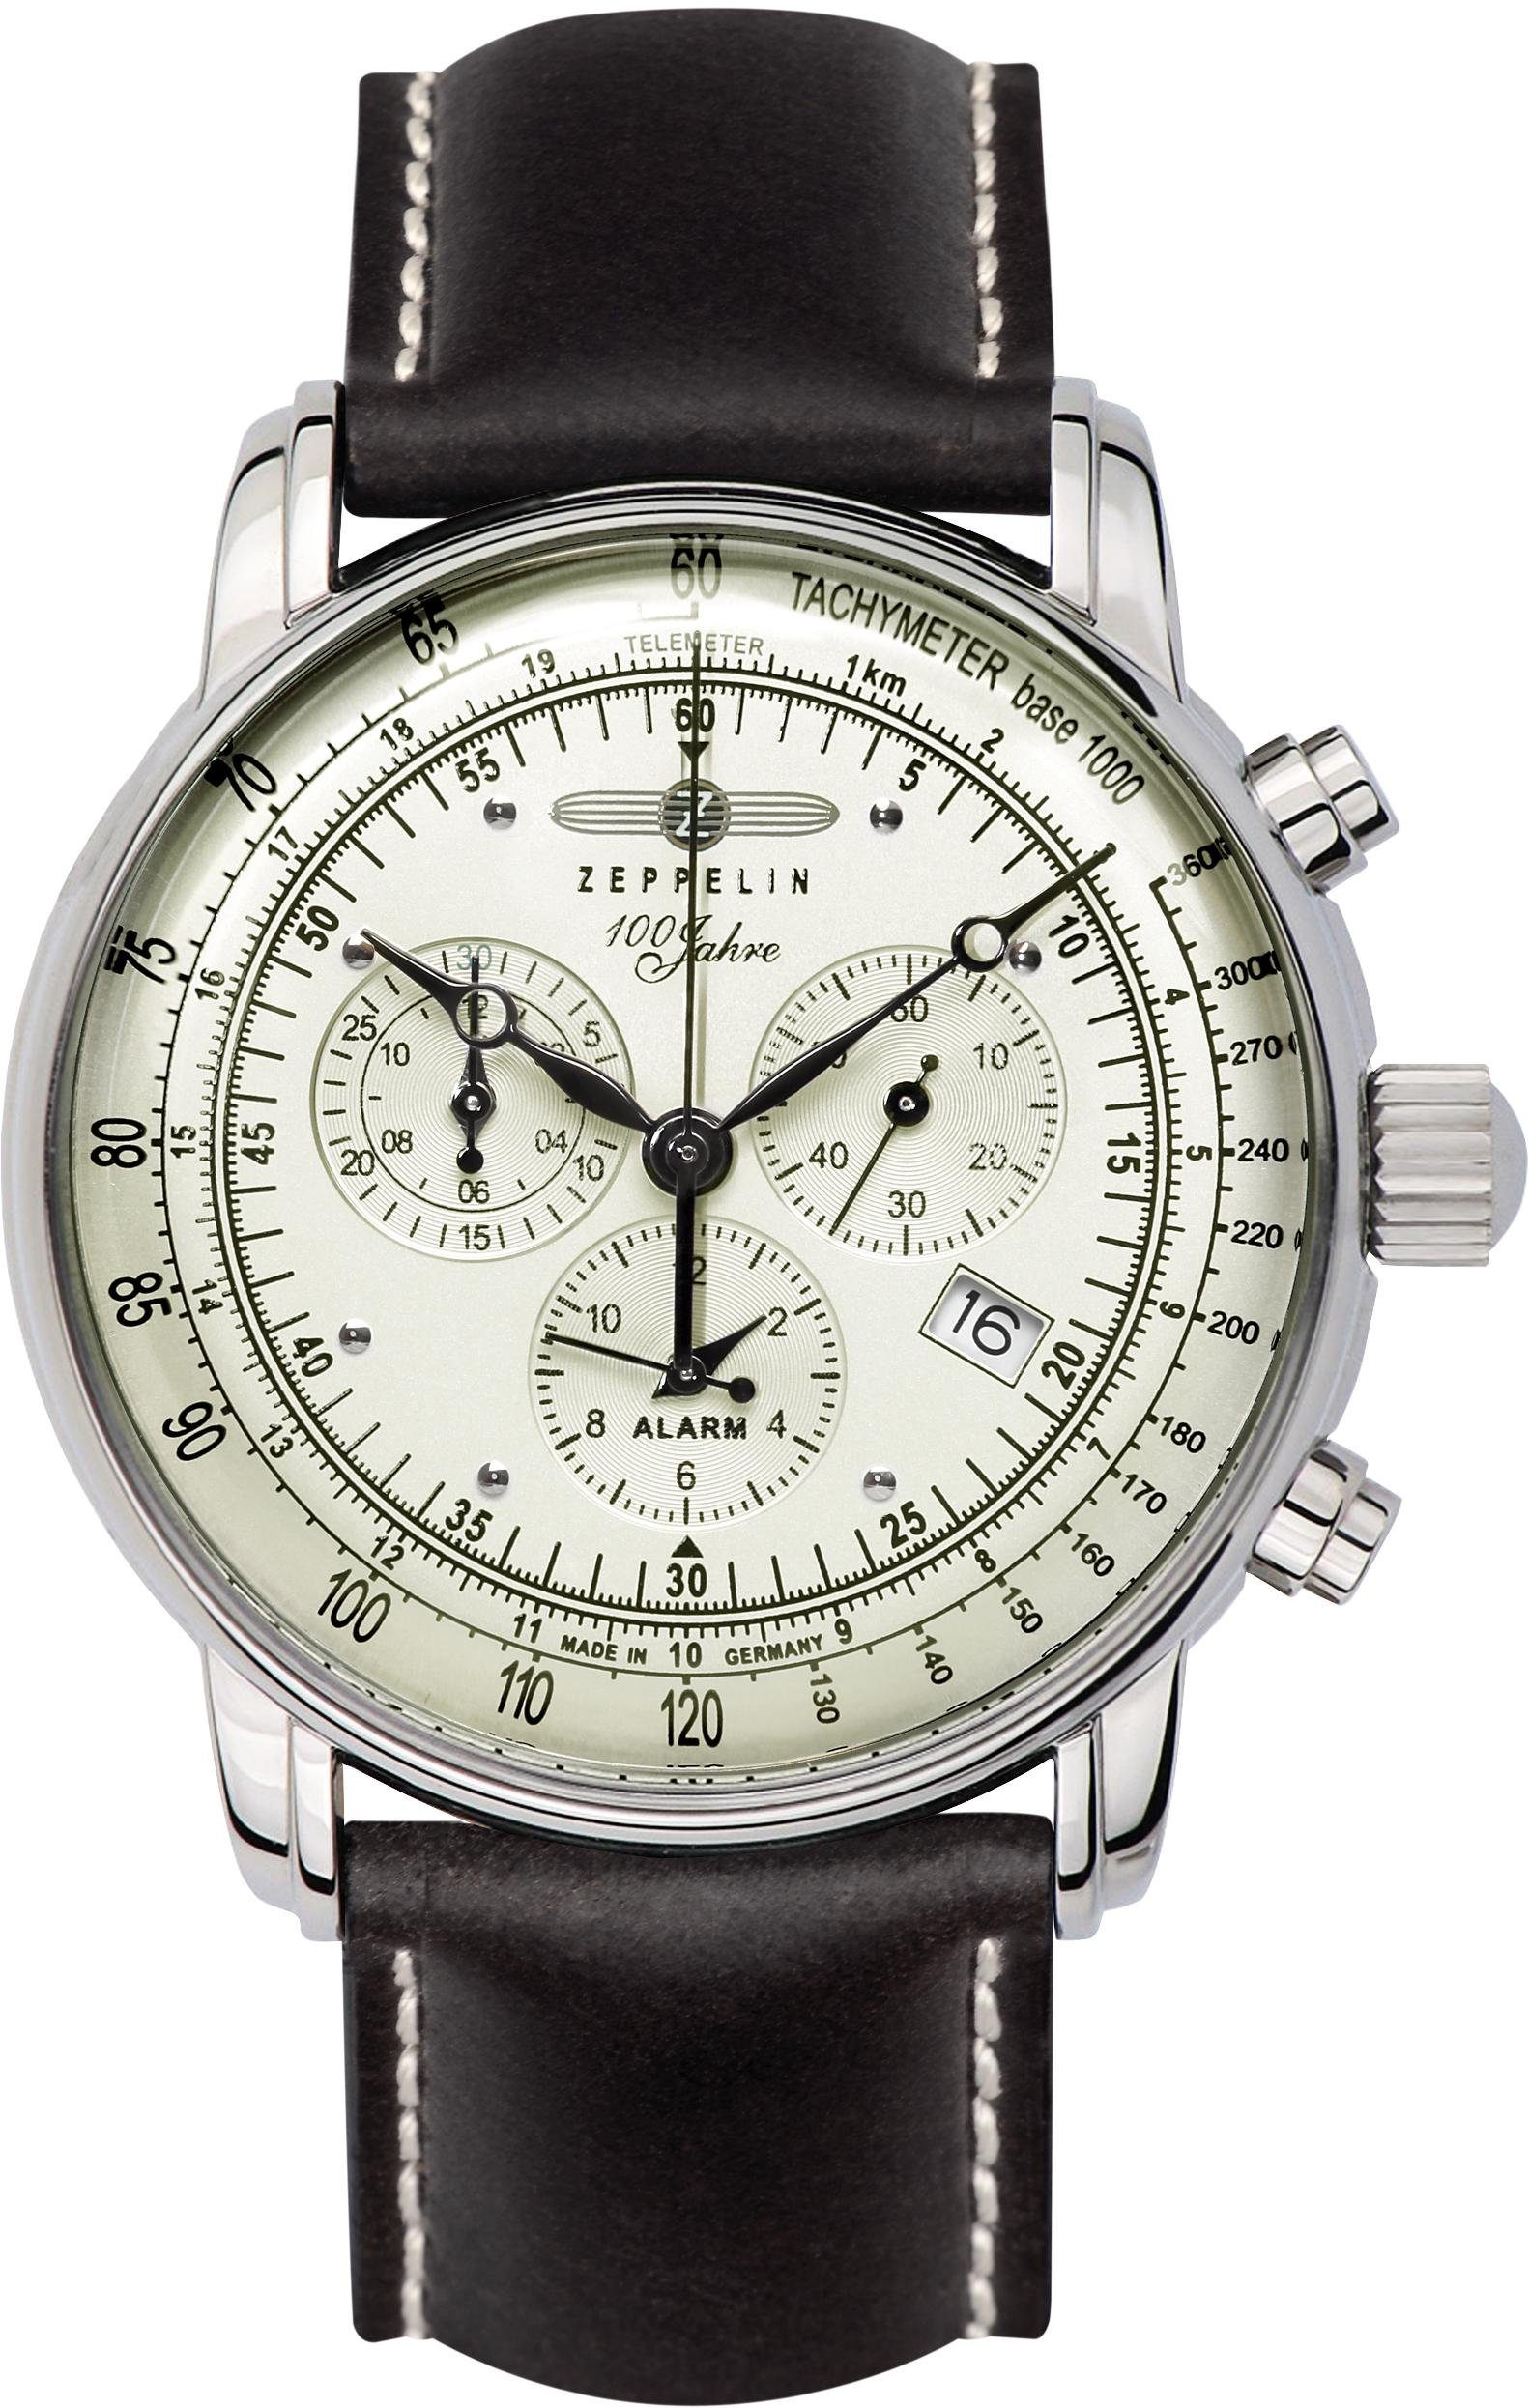 ZEPPELIN Chronograph Jahre Germany in Zeppelin, Made 8680-3, 100